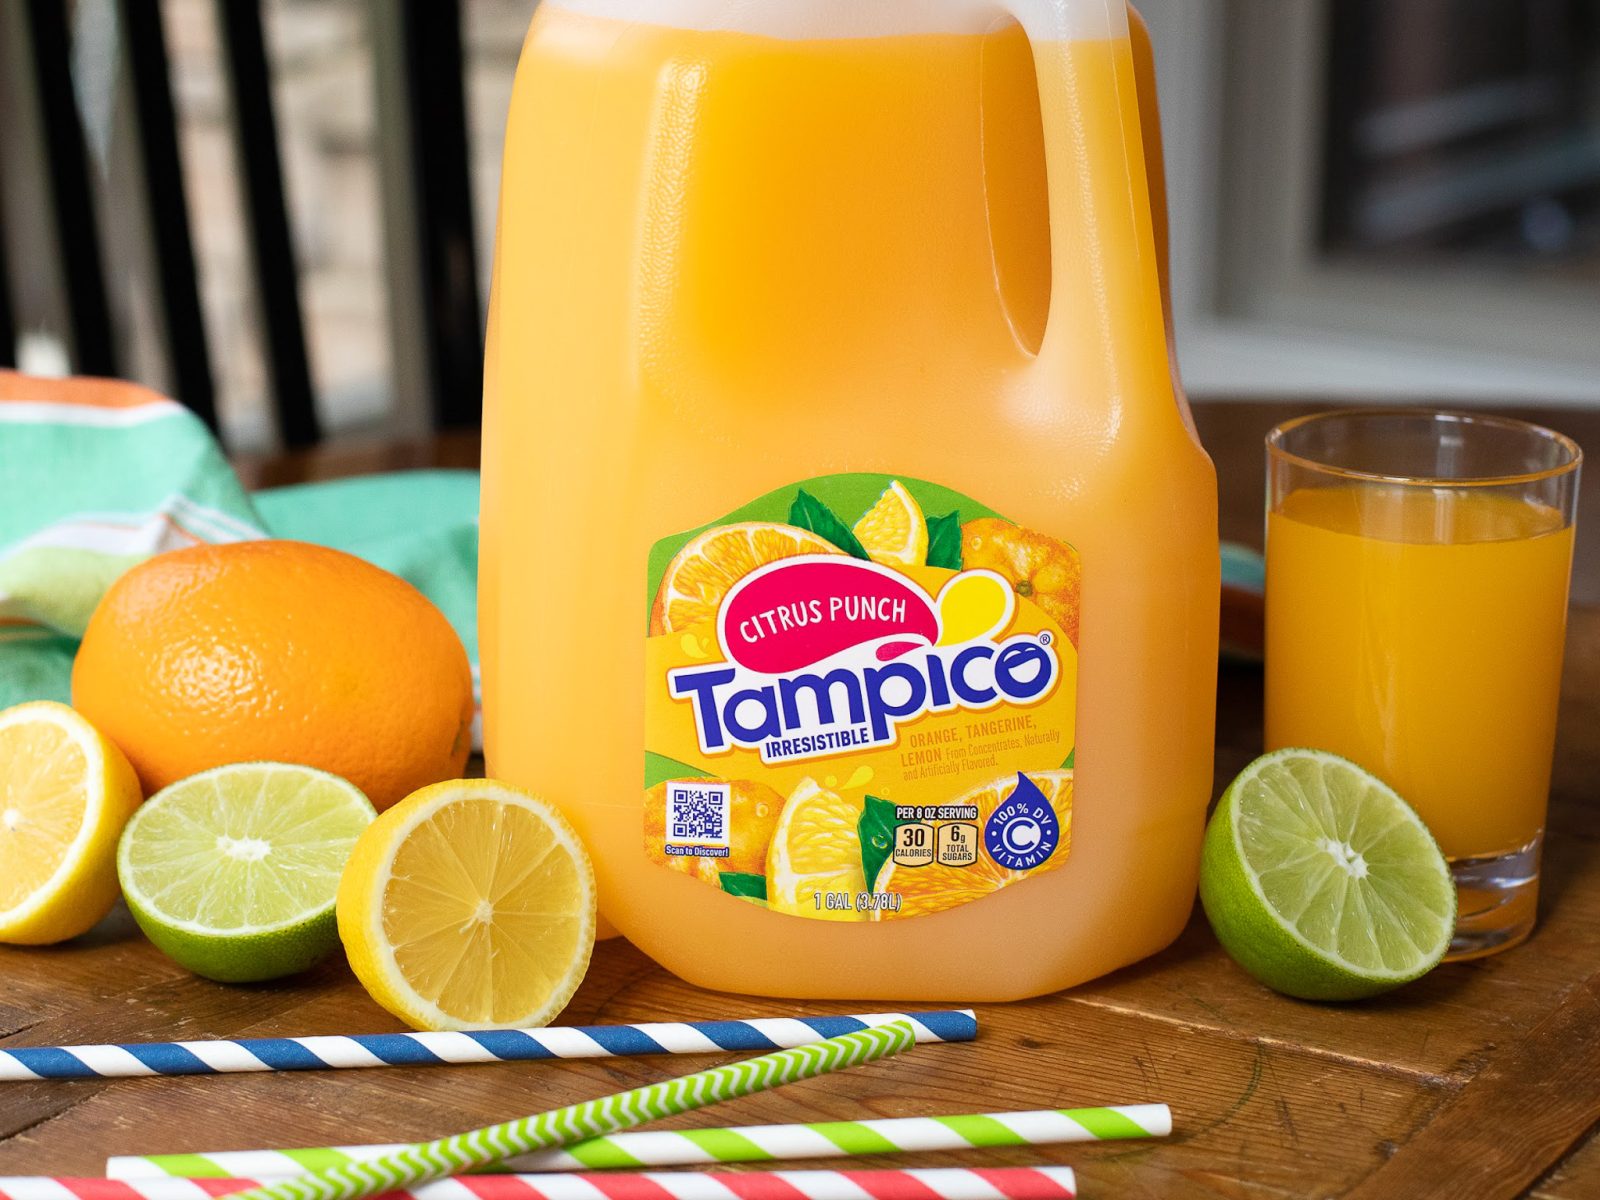 Get Gallon Jugs Of Tampico Punch For Just $1.29 At Kroger